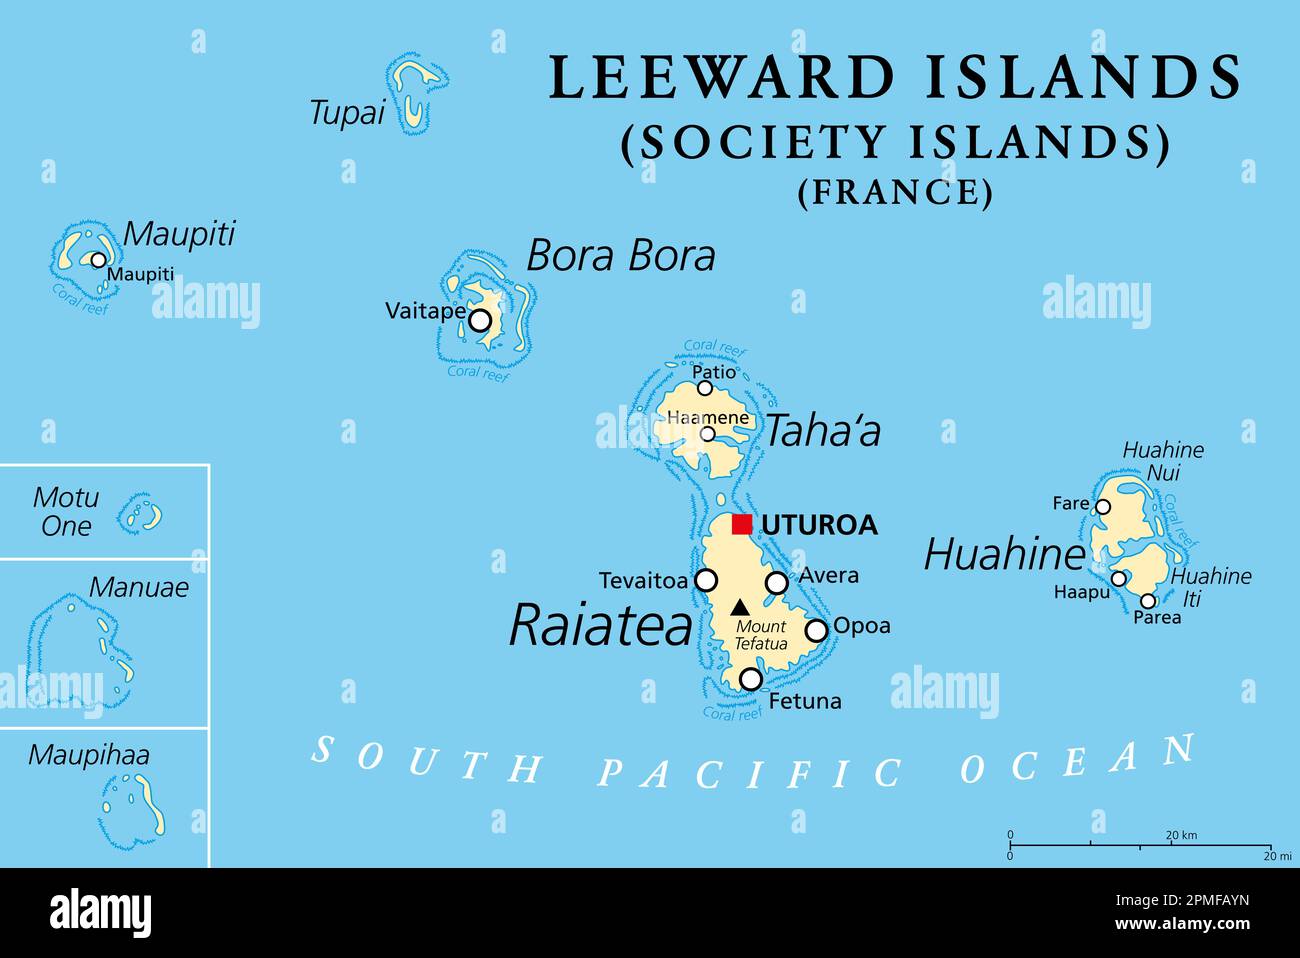 Leeward Islands, political map. Western part of the Society Islands in French Polynesia, an overseas collectivity of France in the South Pacific. Stock Photo